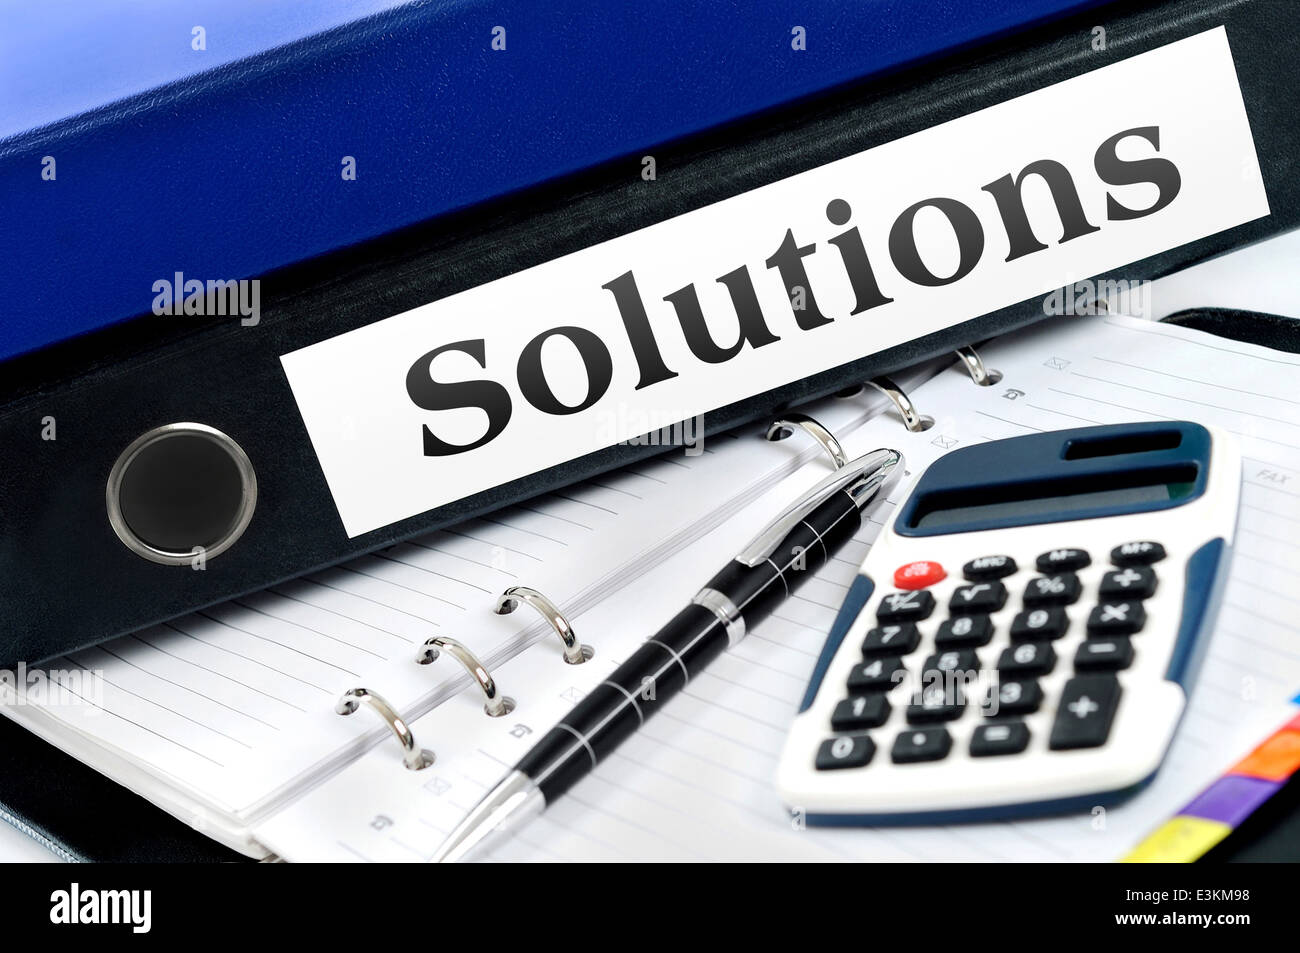 Solutions folder with office tools Stock Photo